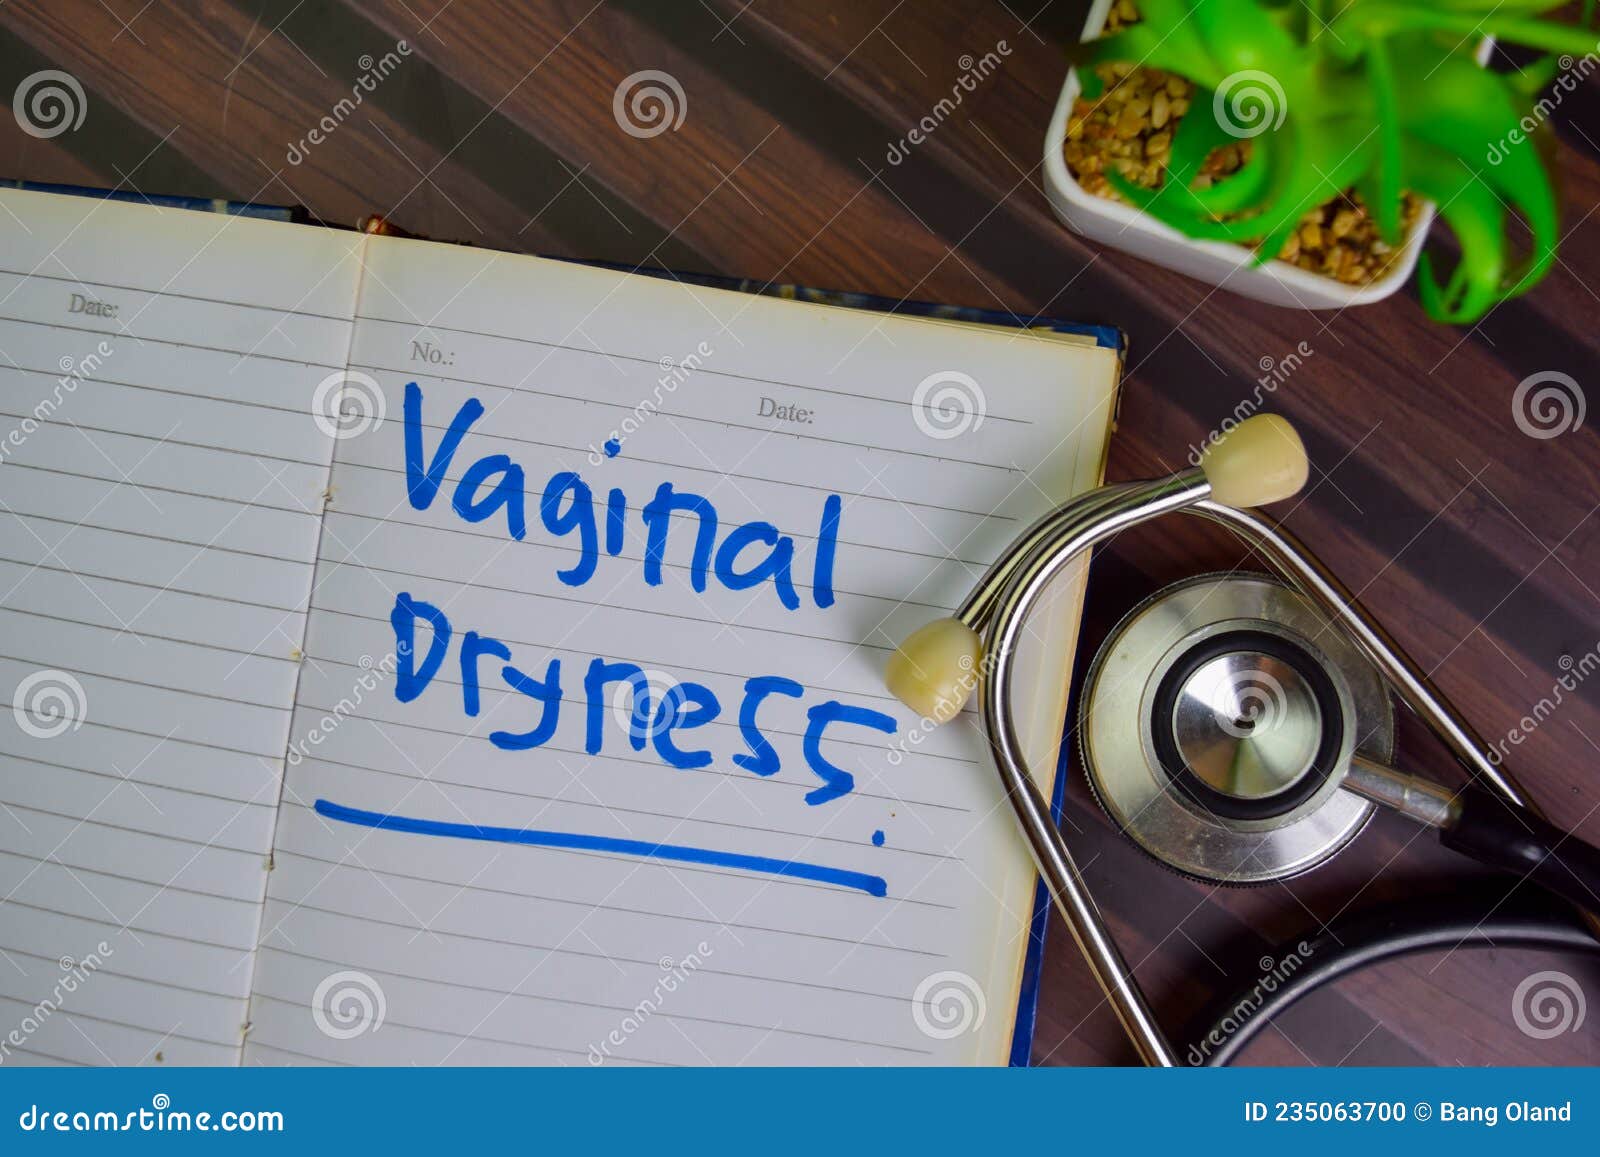 vaginal dryness write on a book  on wooden table